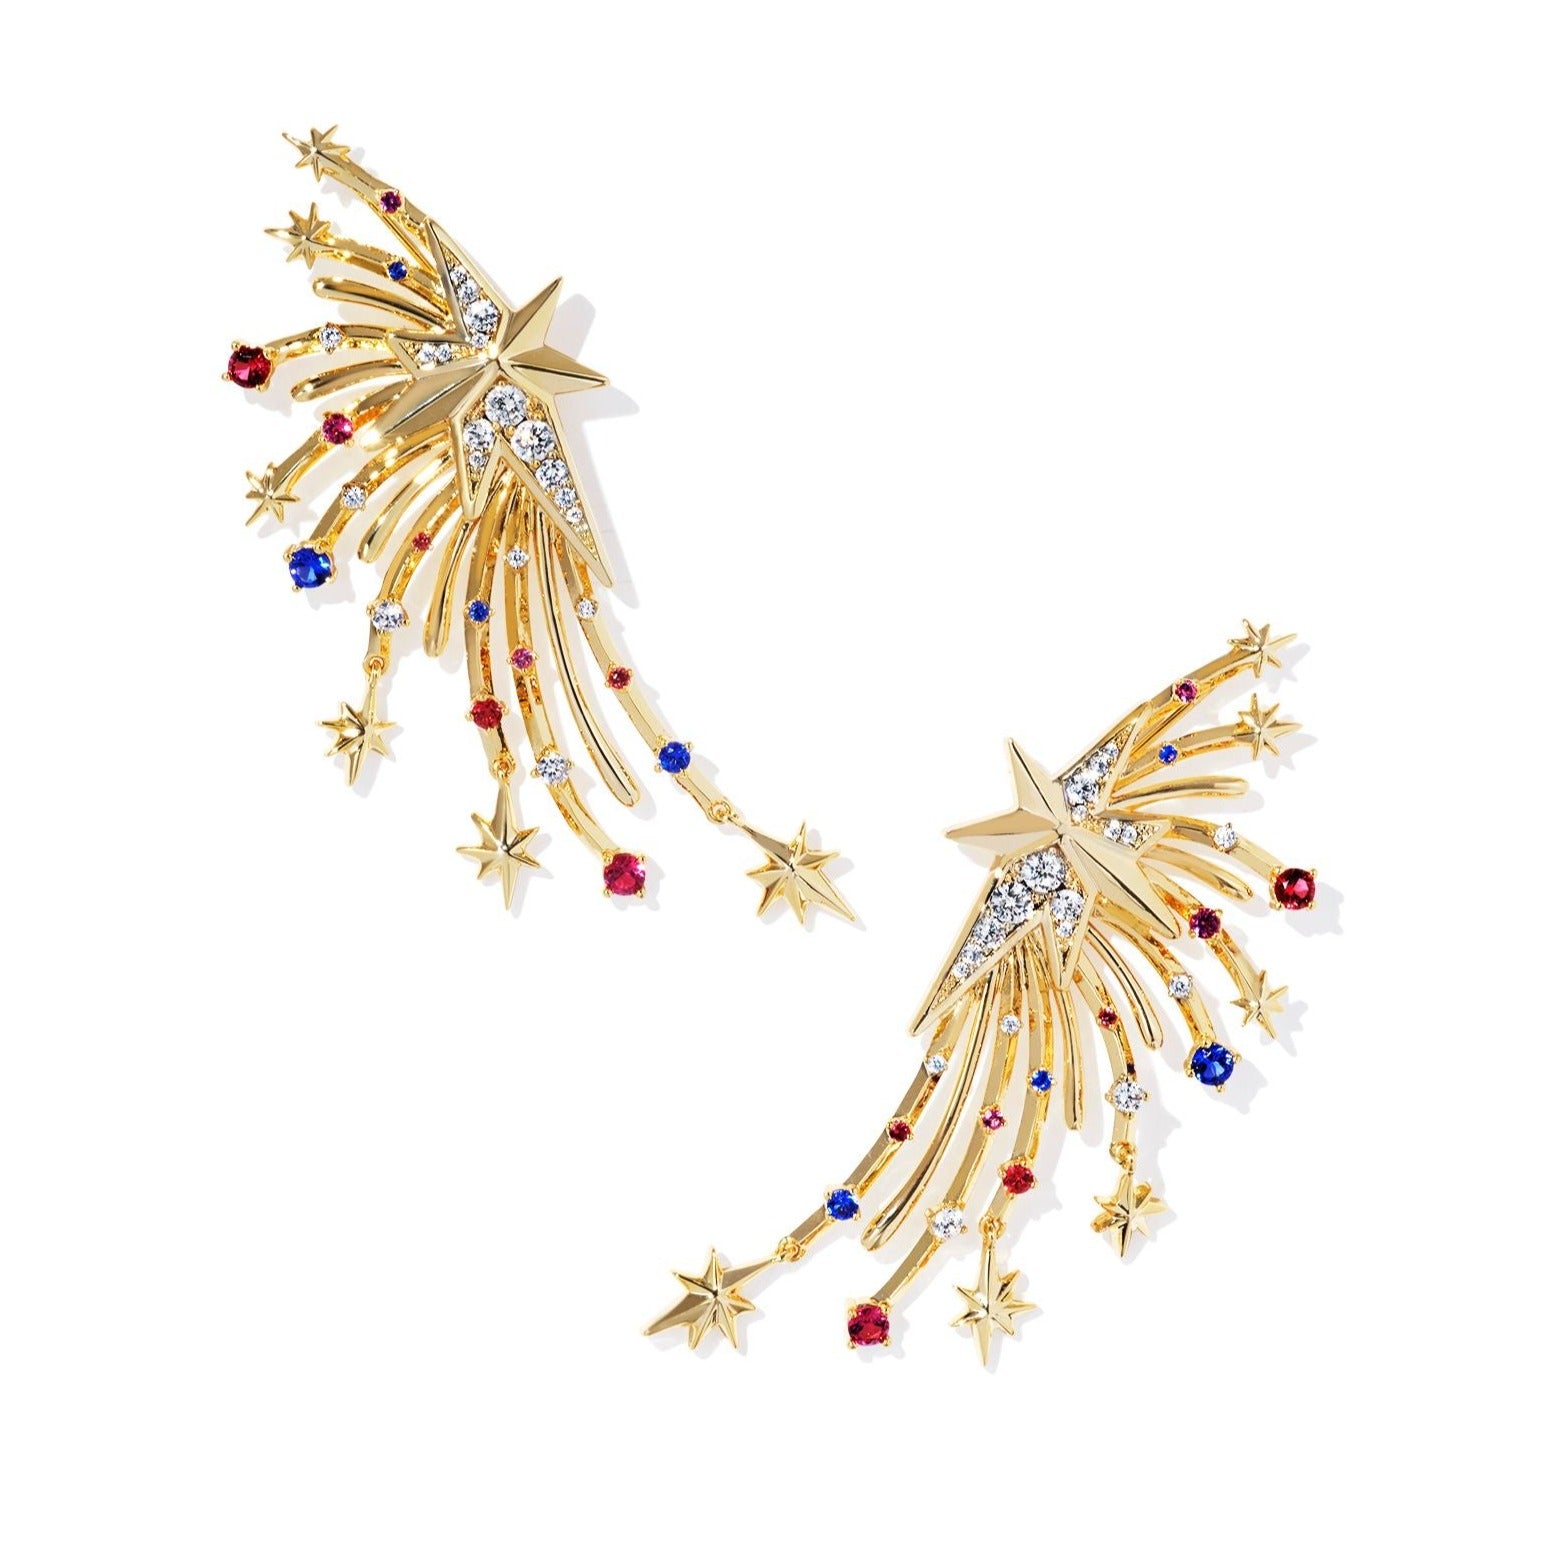 Kendra Scott | Firework Statement Earrings in Red, White, and Blue Mix - Giddy Up Glamour Boutique